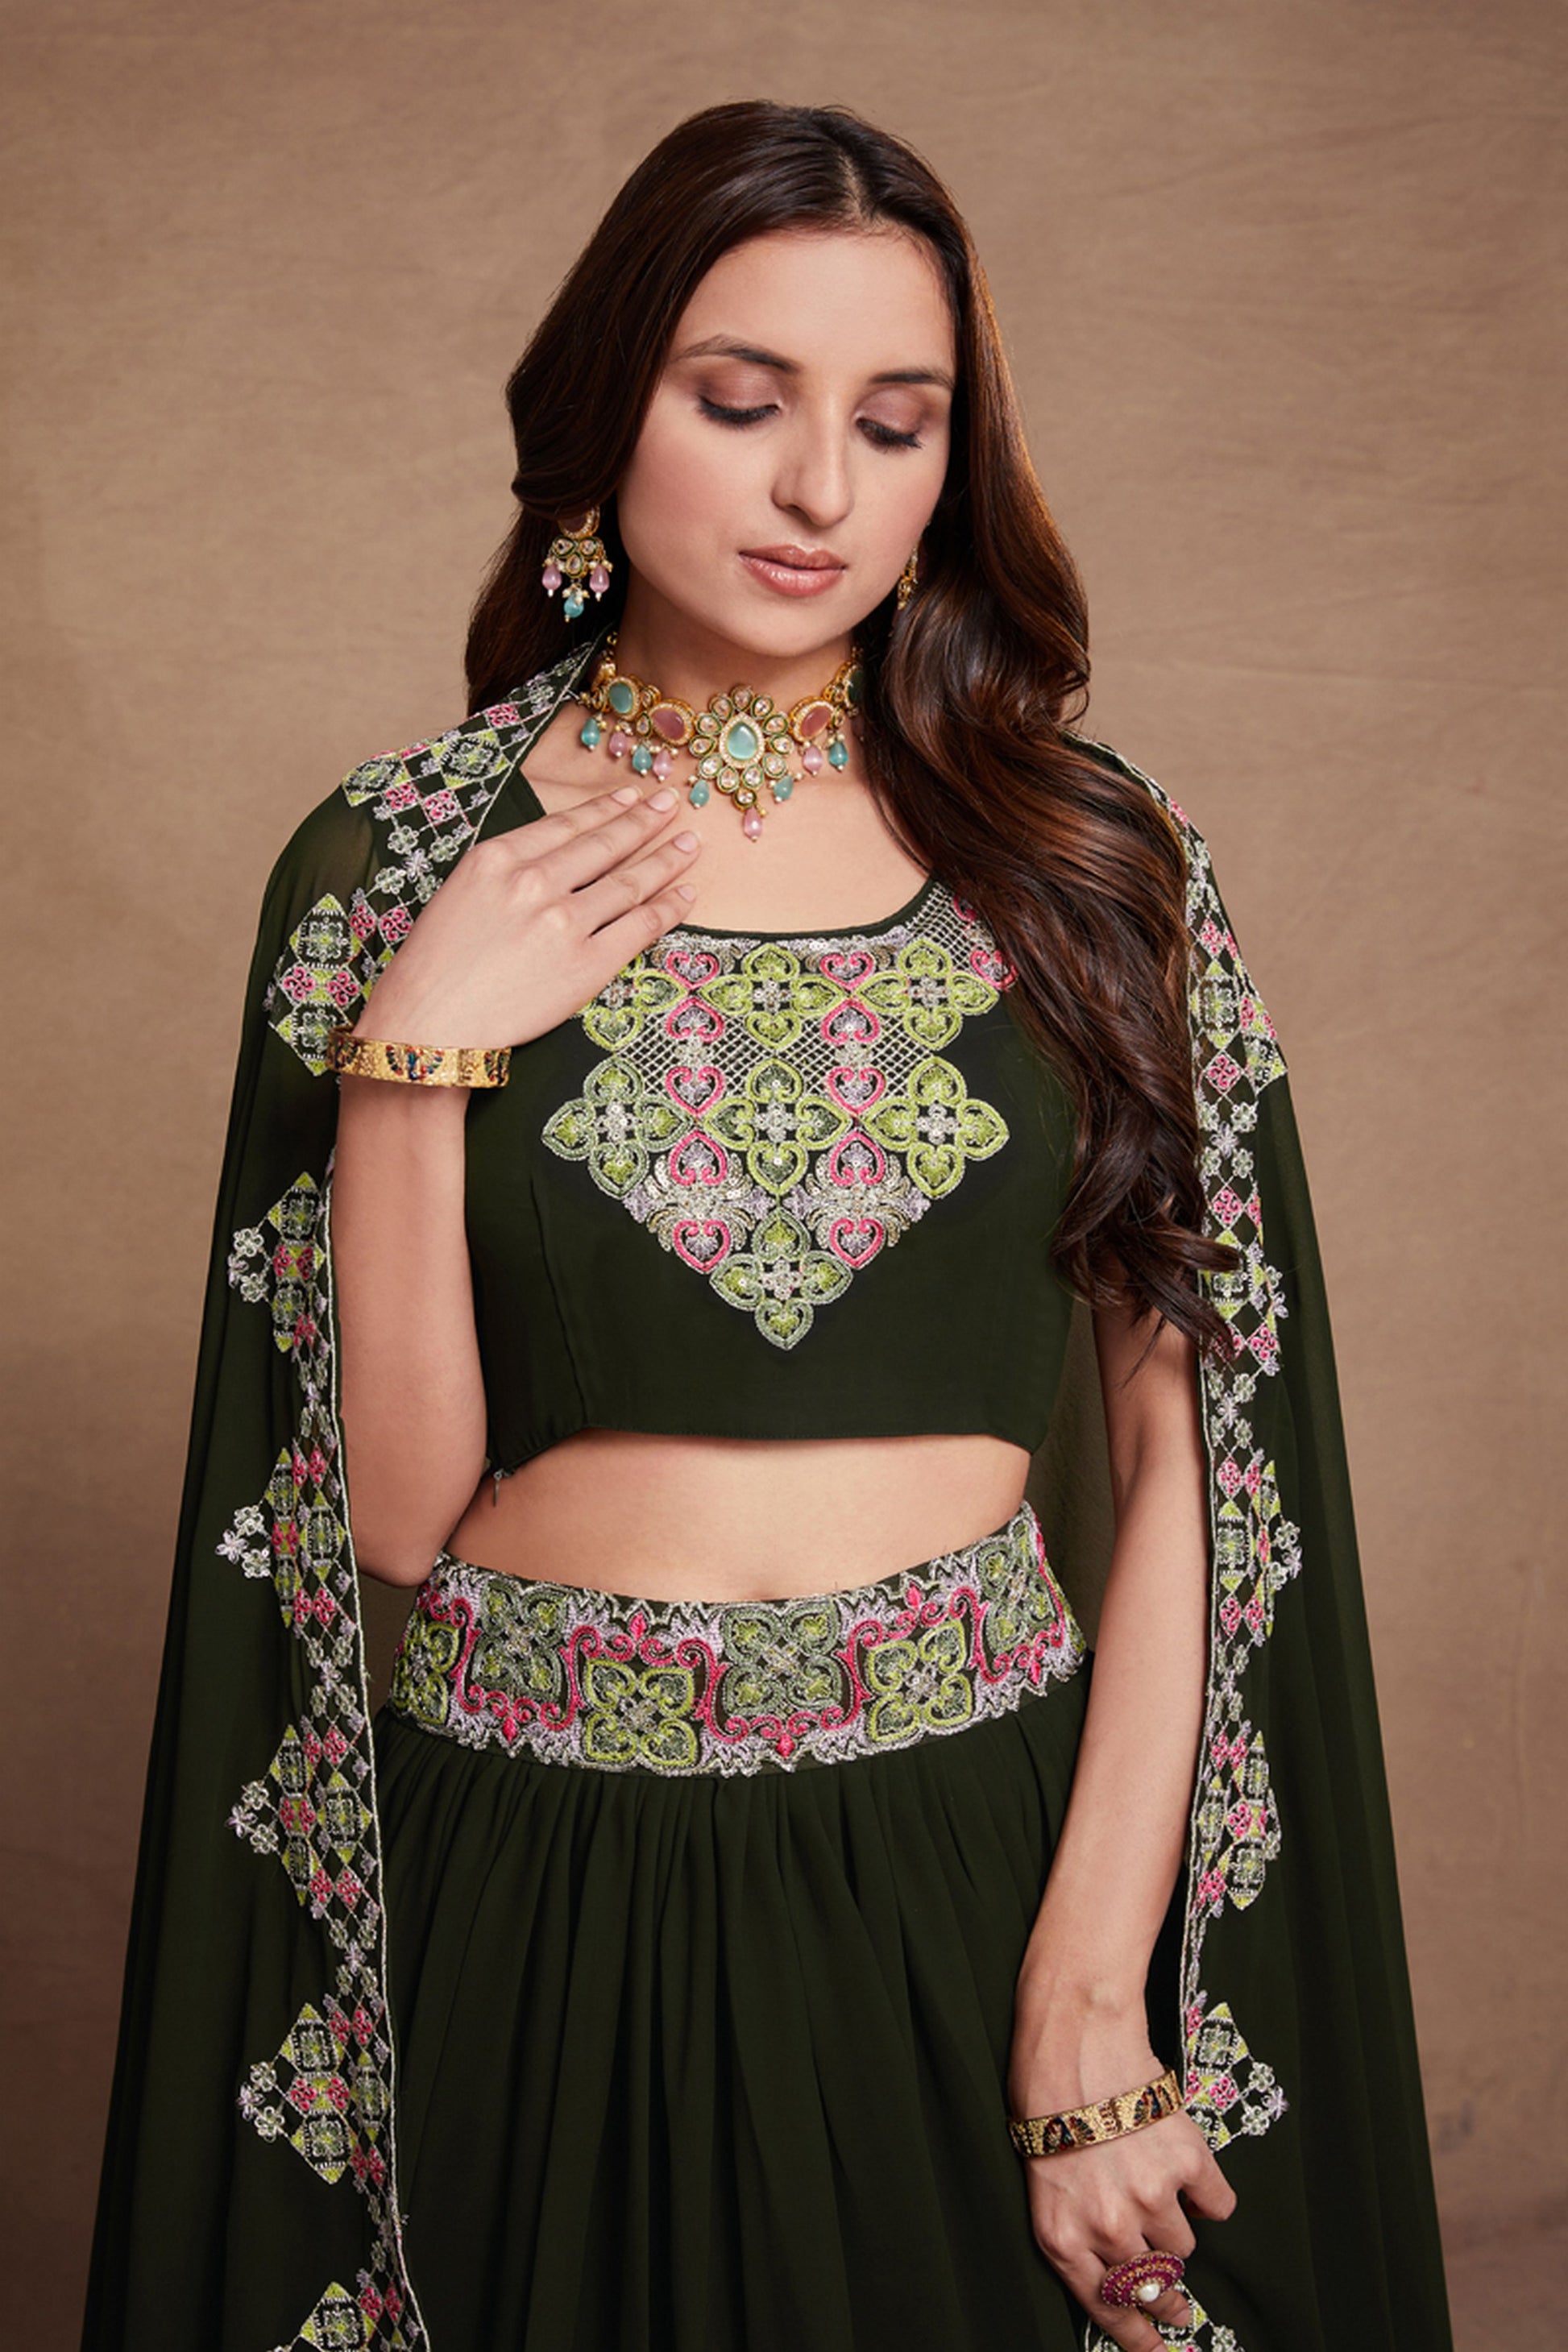 Dark Green Georgette Lehenga Choli 6 Meter Flair For Indian Festivals & Weddings - Sequence Embroidery Work, Thread Embroidery Work